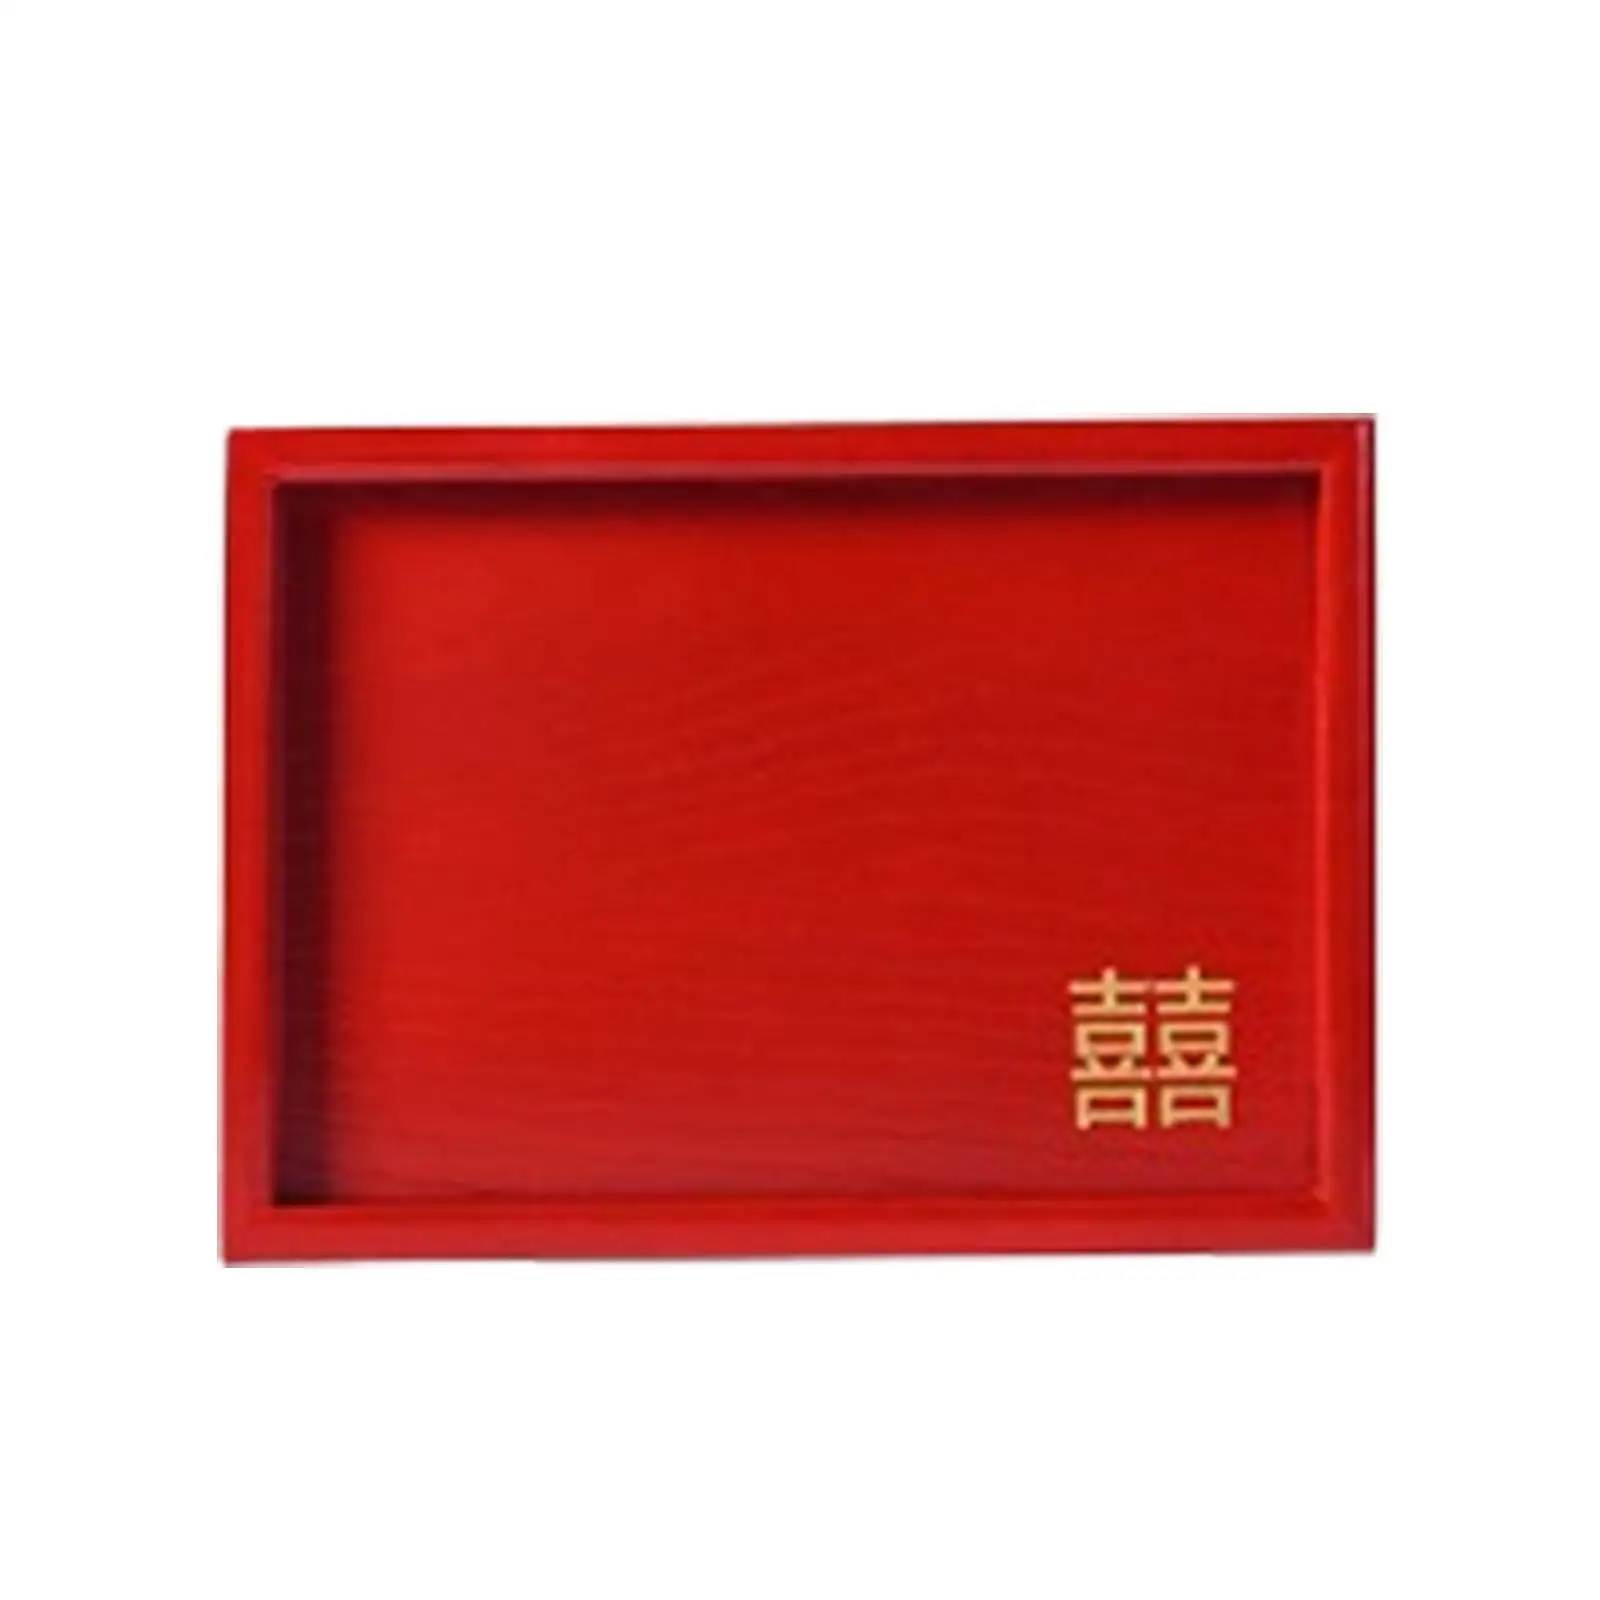 Xi Character Wedding Serving Tray Traditional Fruit Plate for Wedding Supplies Celebration Bridal Shower Counter Festival